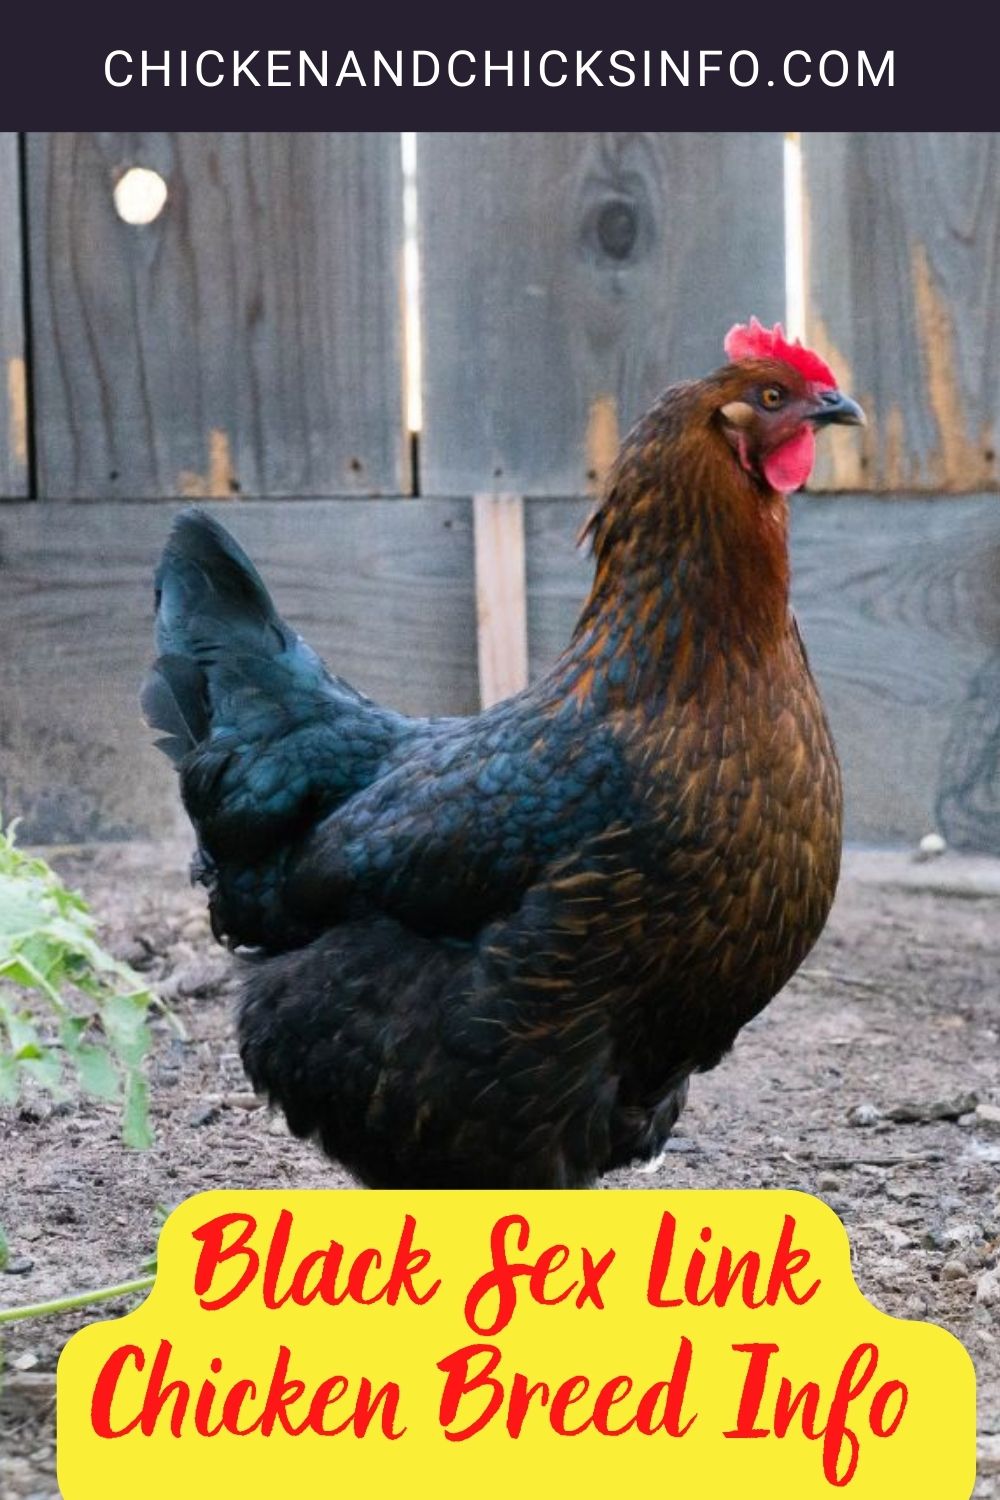 Black Sex Link Chicken Breed Info + Where to Buy pinterest image.